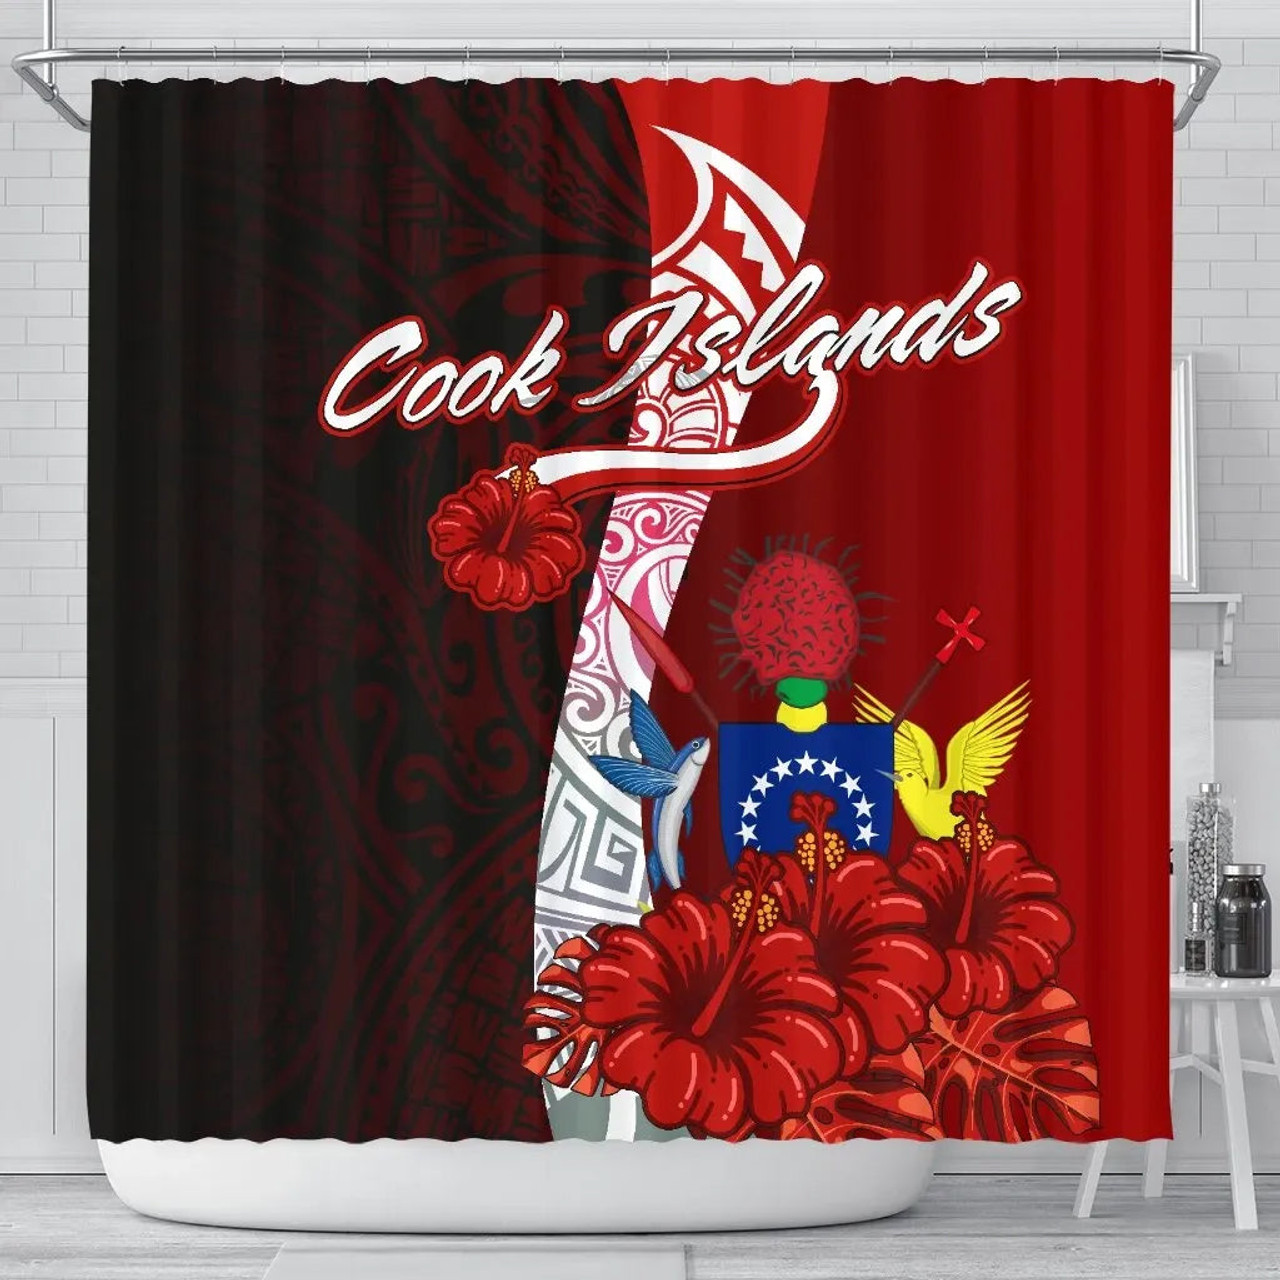 Cook Islands Polynesian Shower Curtain - Coat Of Arm With Hibiscus 1